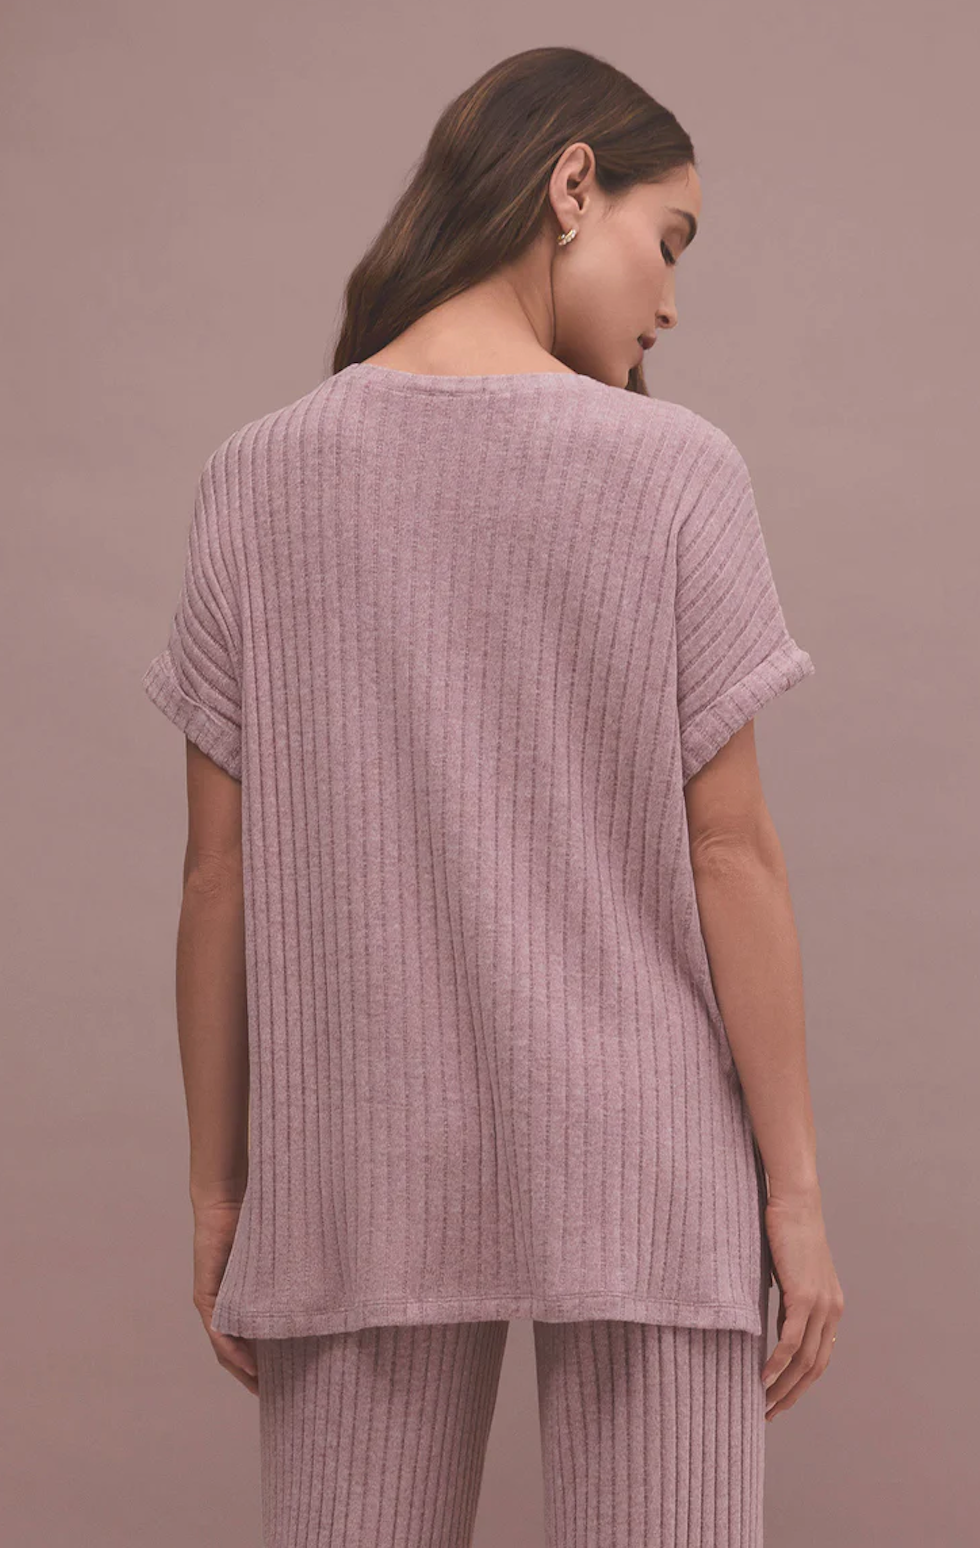 Z SUPPLY TAKE IT EASY RIB TUNIC TOP IN VIOLET HEATHER